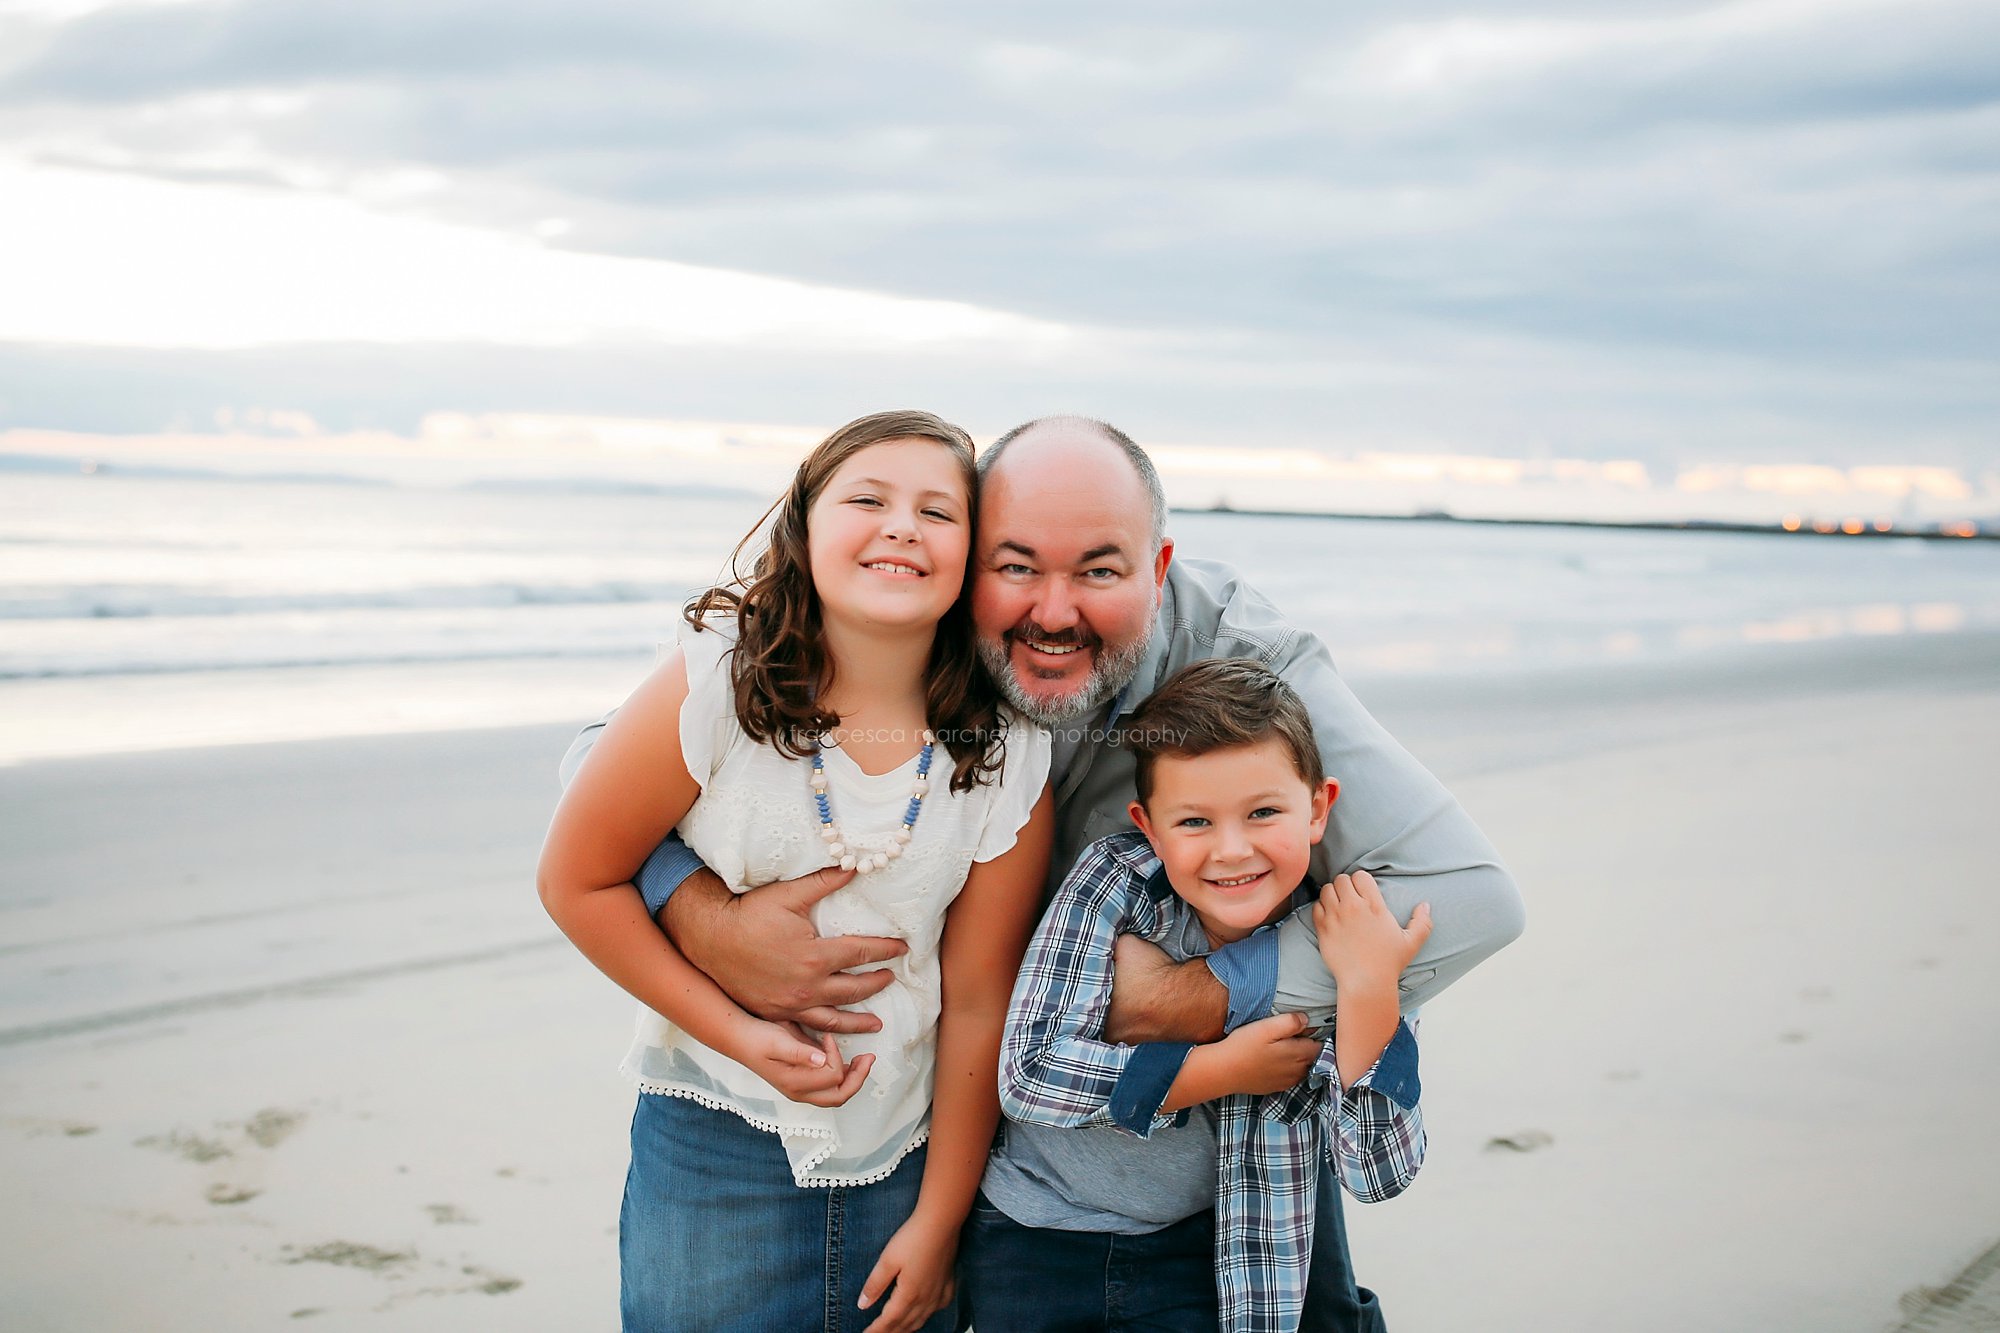 Francesca Marchese Photography Long Beach family photographer sunset beach session - Orange County, Los Angeles photographer father with children